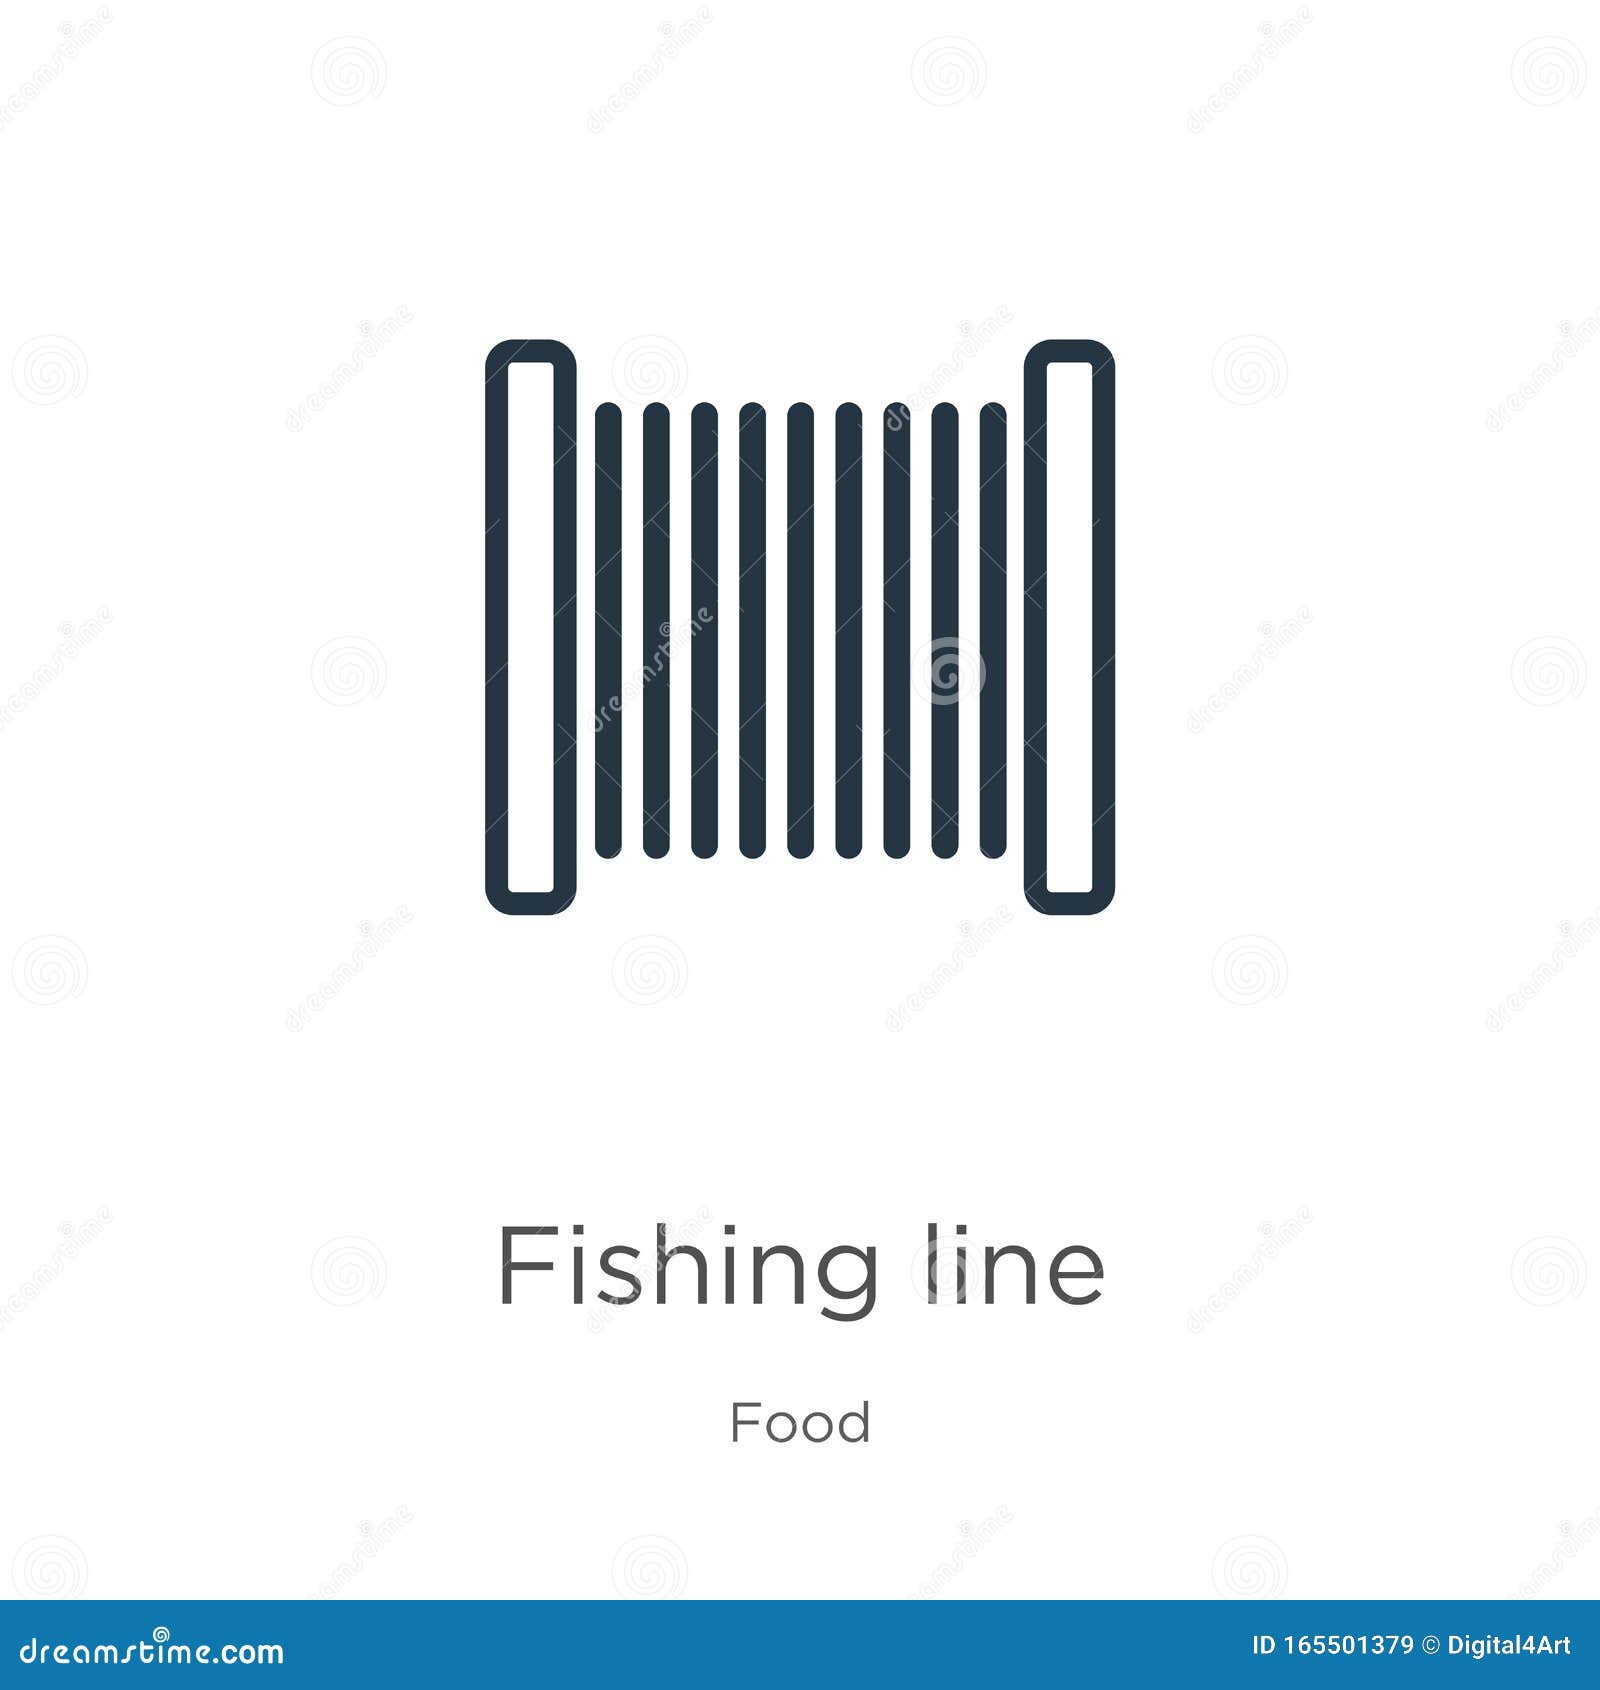 https://thumbs.dreamstime.com/z/fishing-line-icon-thin-linear-outline-isolated-white-background-food-collection-vector-sign-symbol-web-mobile-165501379.jpg